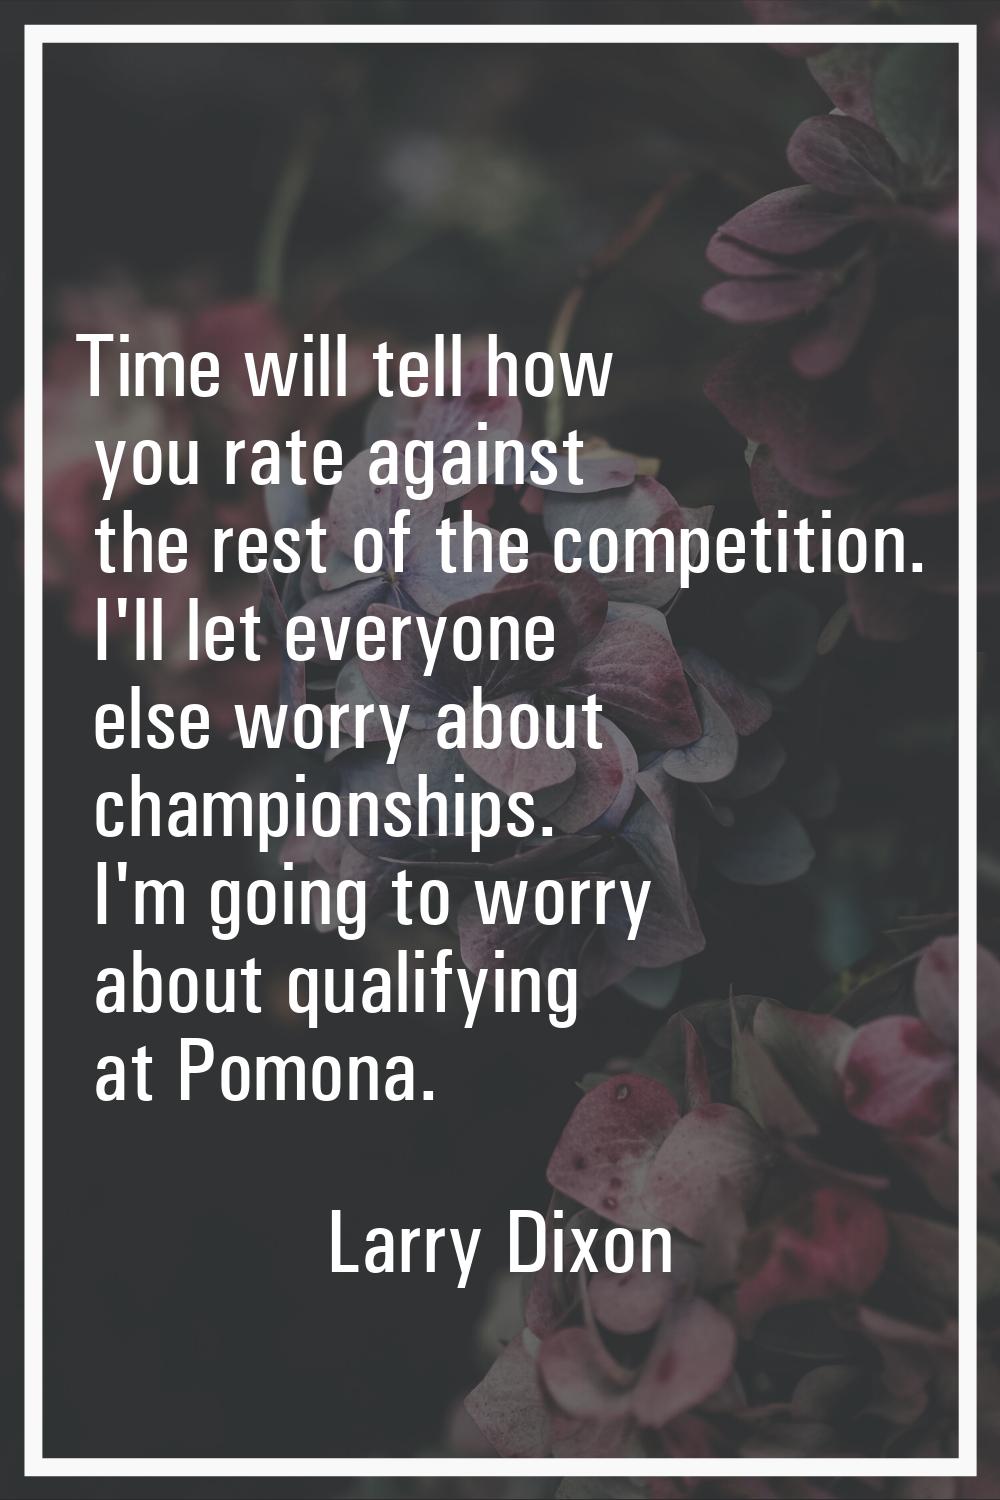 Time will tell how you rate against the rest of the competition. I'll let everyone else worry about